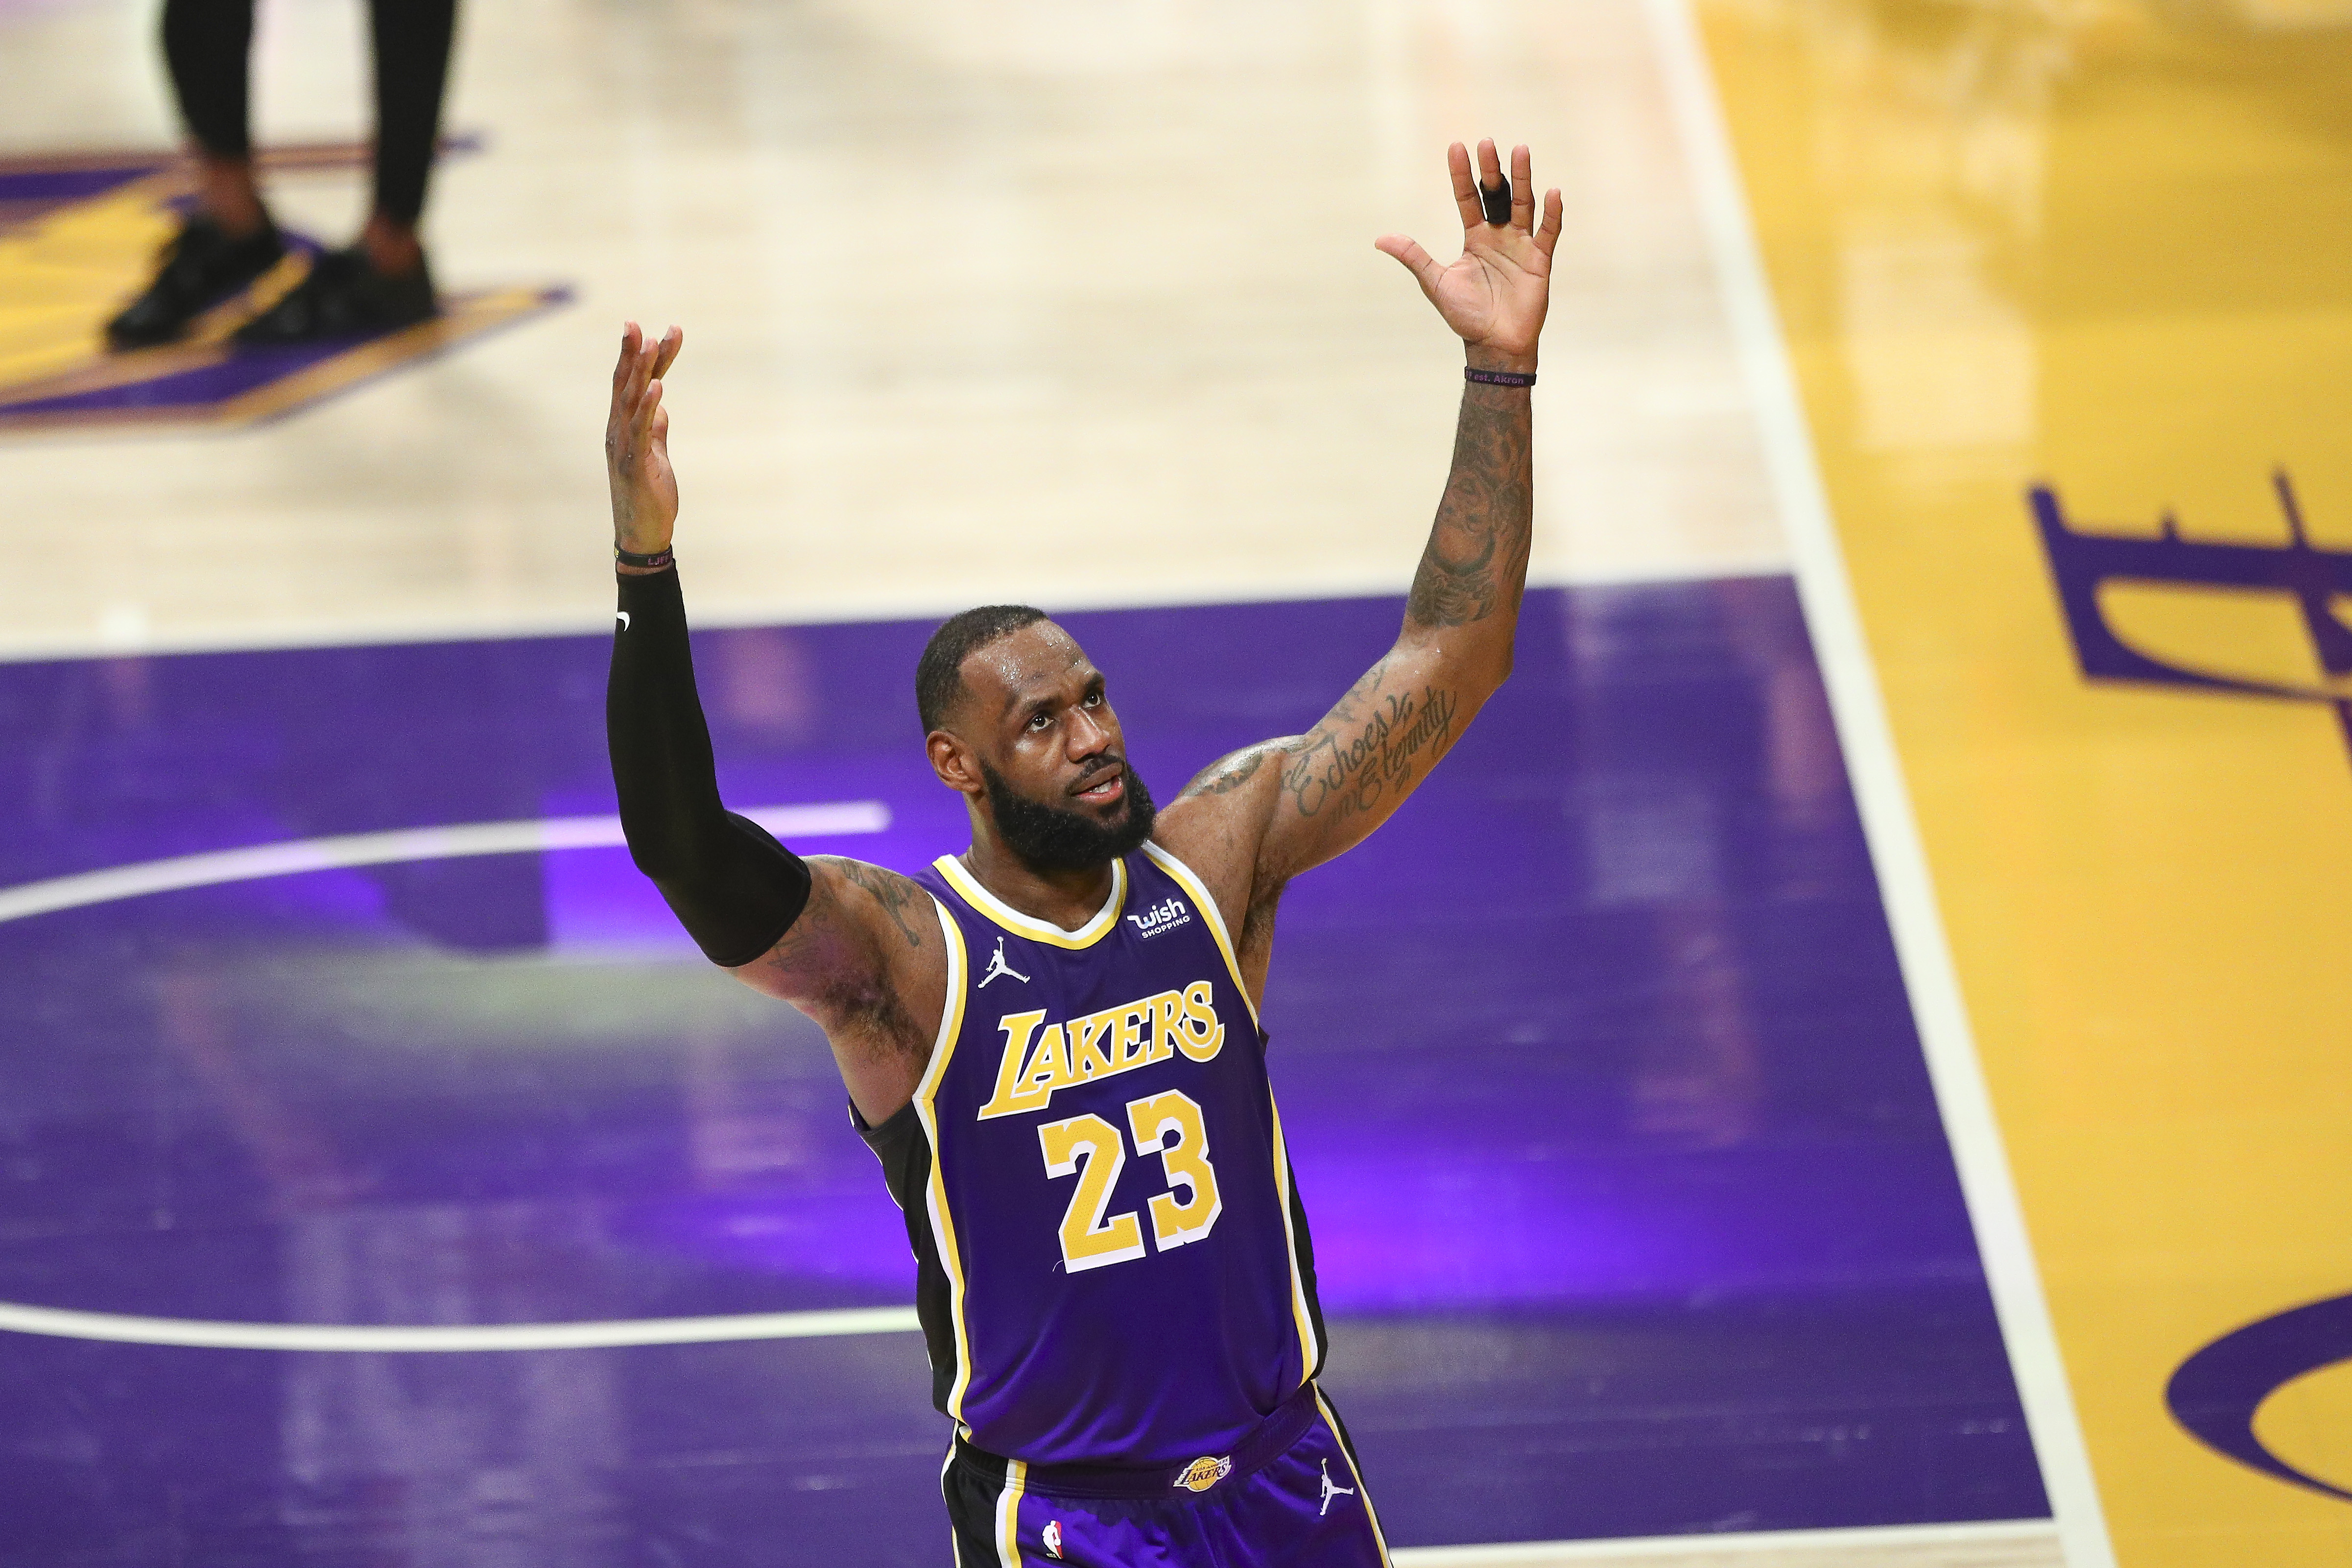 LeBron James celebrates after hitting a shot for the Lakers against the Grizzlies in February 2021